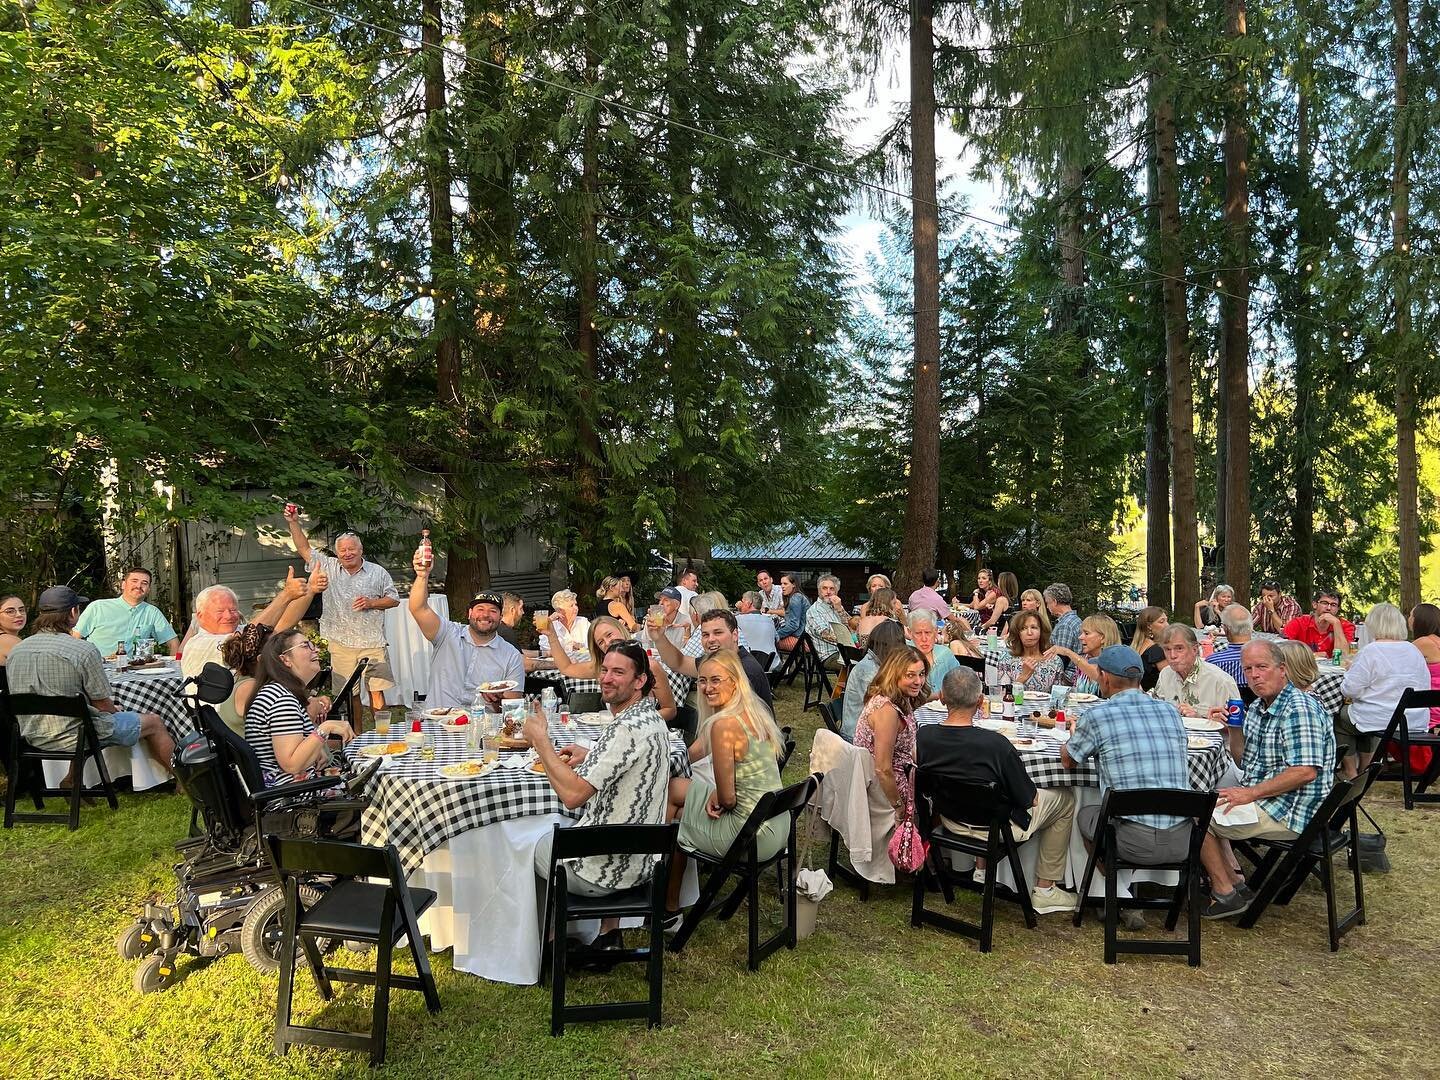 Today we catered for a great group of people. The Pacific Northwest is such a beautiful place. #richardstoogoodseattlebbq #bbq #richardstoogoodproducts #catering #brisket #ribs #chicken #citrusmangosalad #freshdillpotatosalad #honeycornbread #forthep